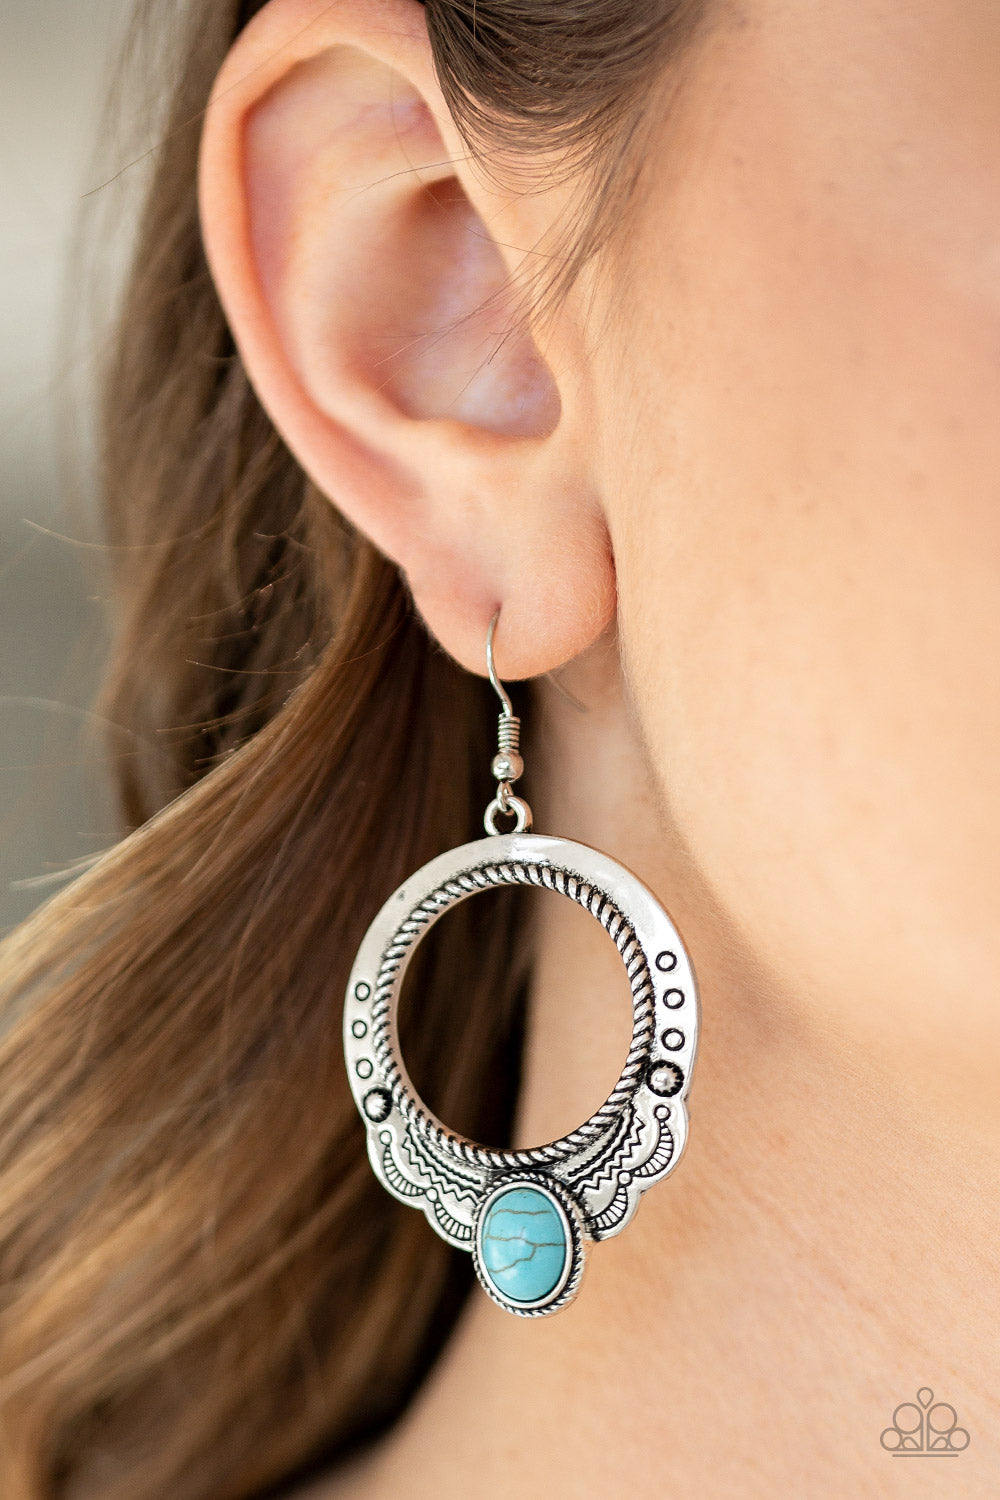 NATURAL SPRINGS - BLUE TURQUOISE OVAL SCALLOPED SILVER TEXTURED SOUTHWESTERN EARRINGS